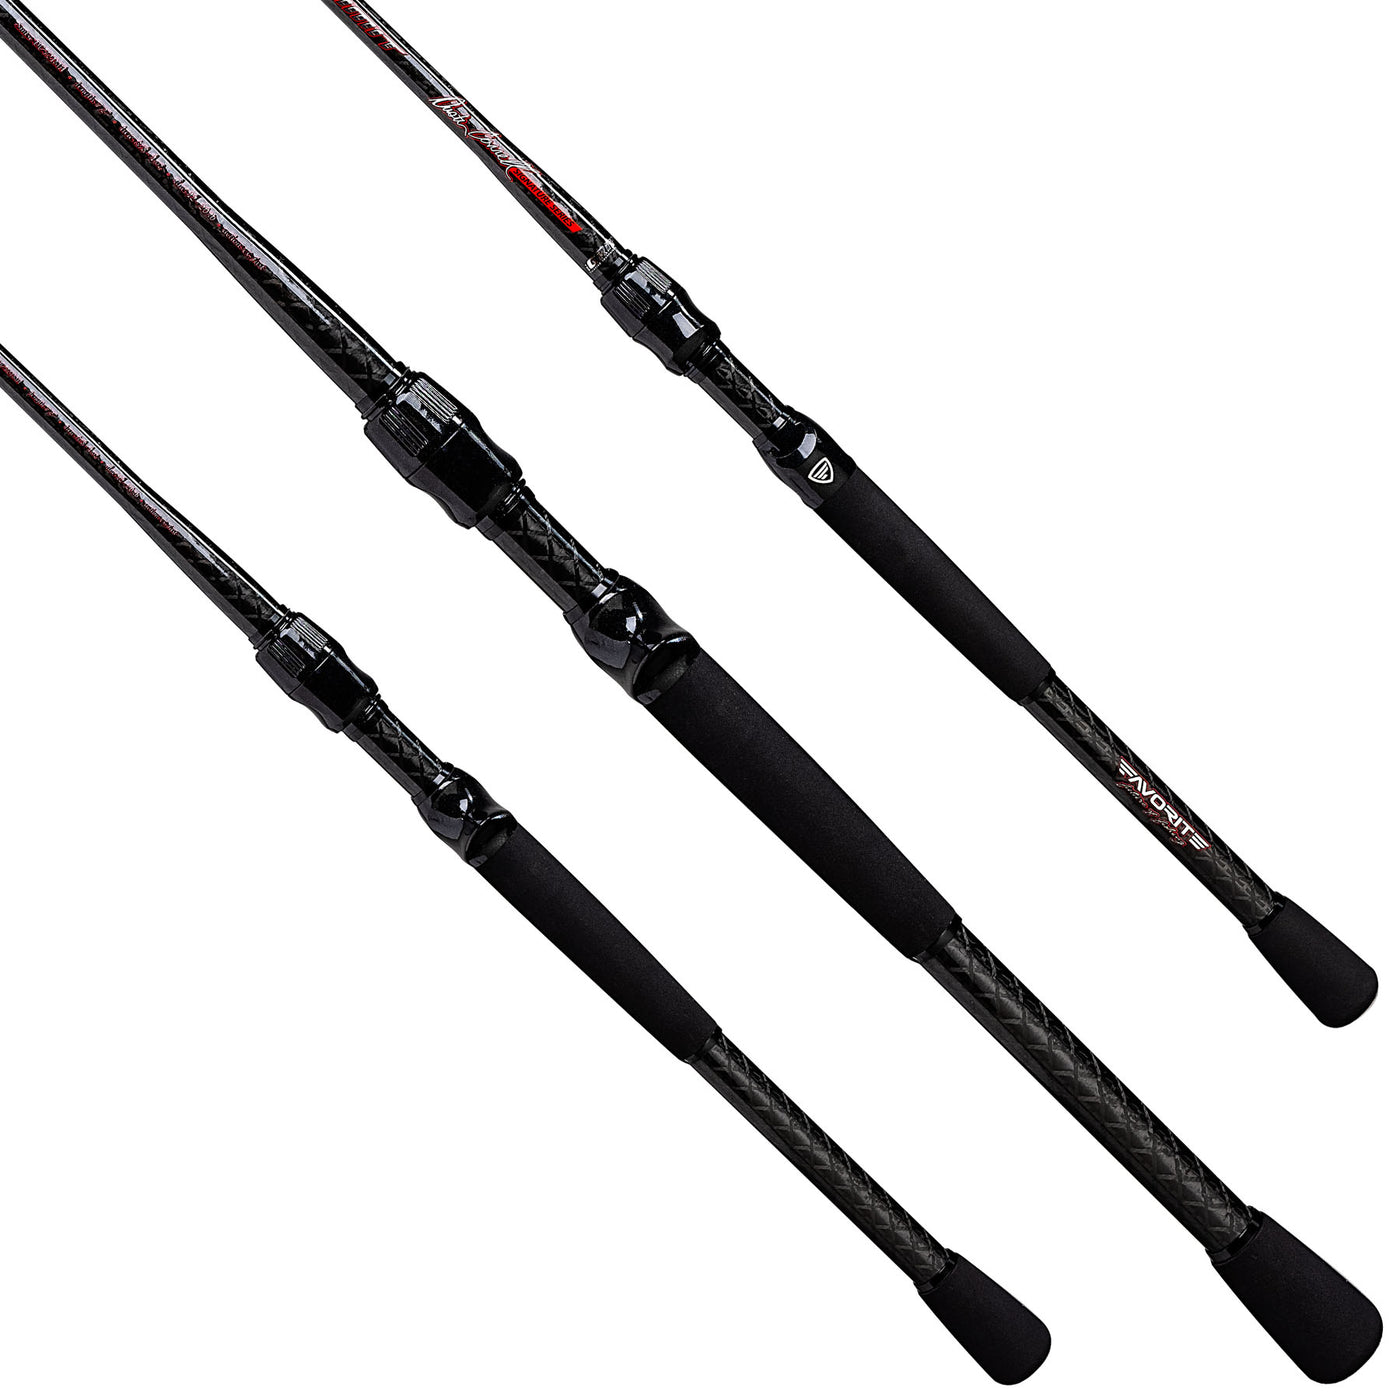 Signature Series: Dustin Connell Summit Rod Favorite Fishing